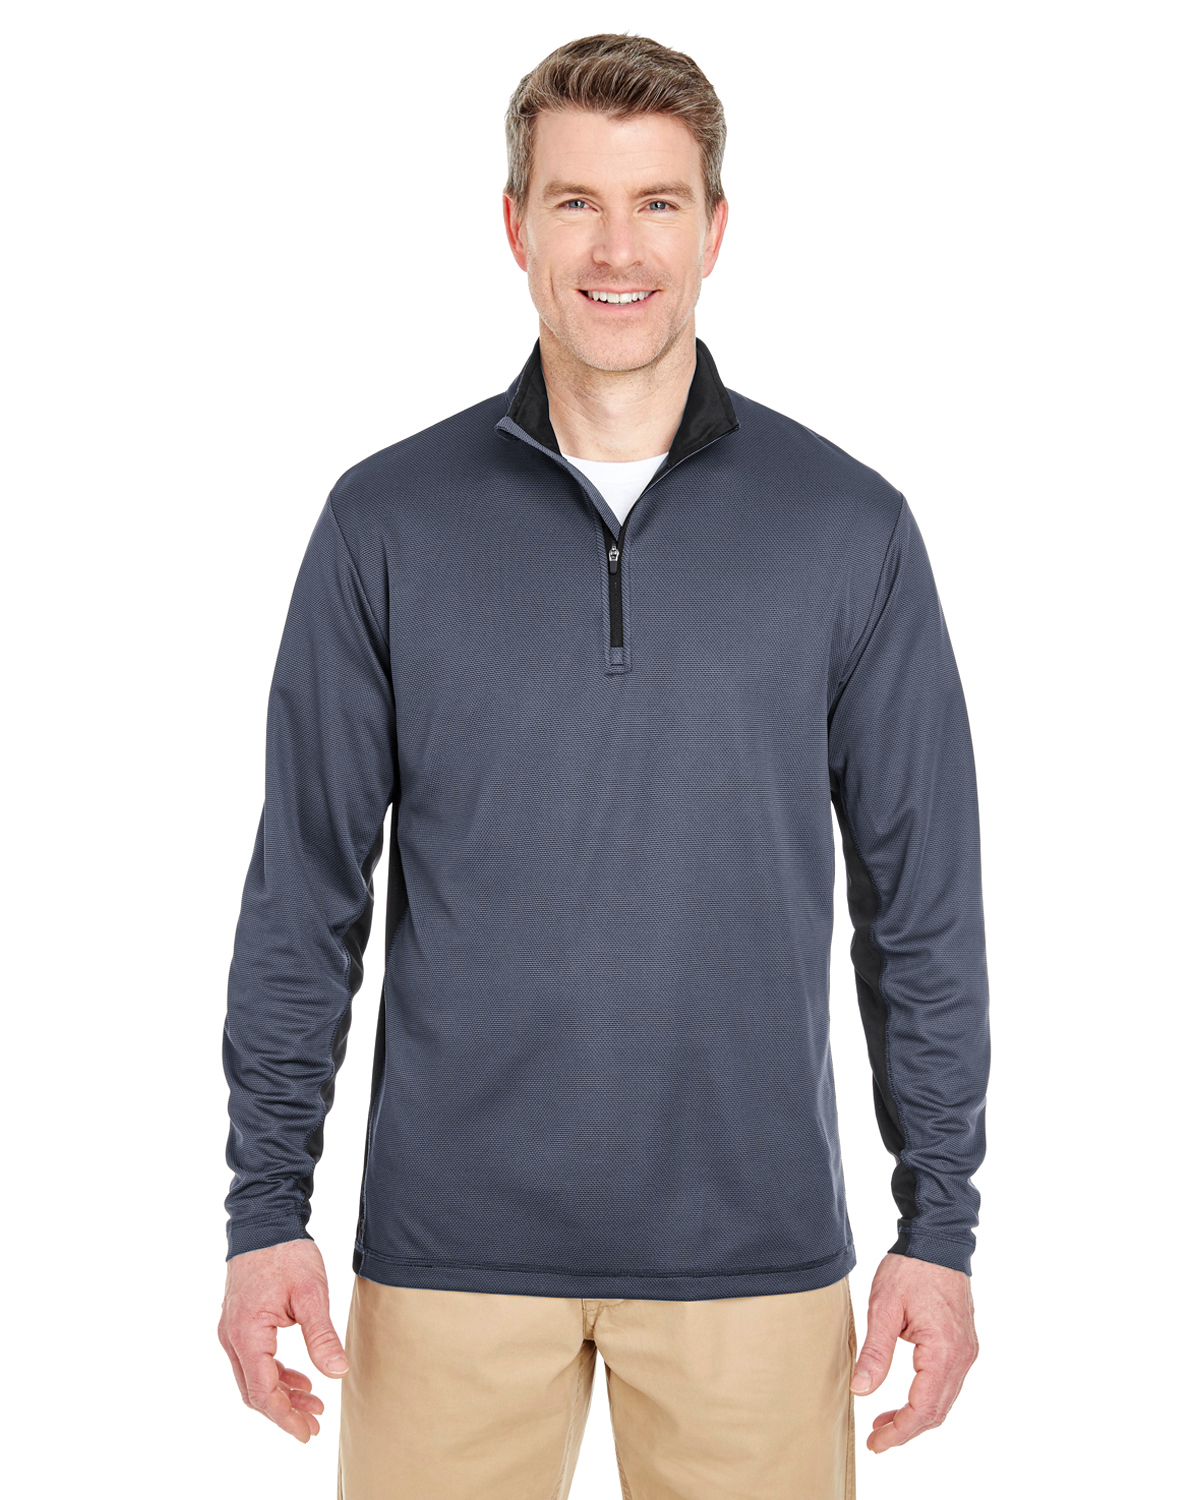 UltraClub Adult Two-Tone Keyhole Mesh Quarter-Zip Pullover